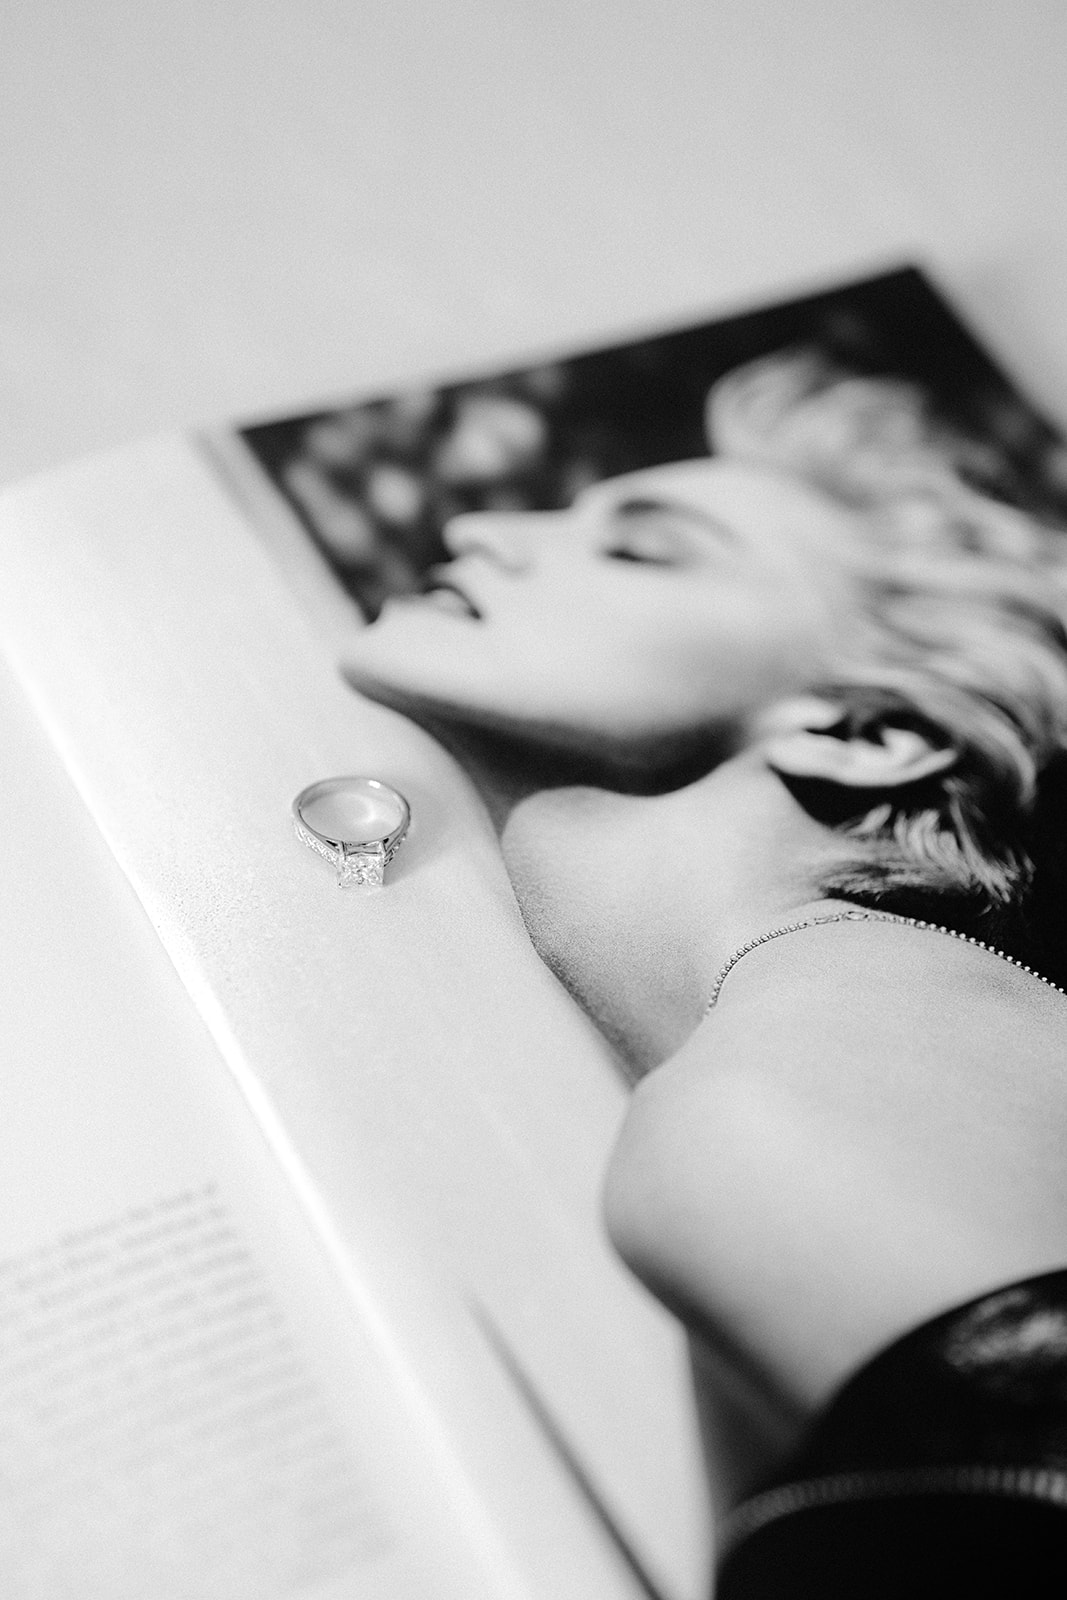 The engagement ring of the bride on a Marylin Monroe magazine